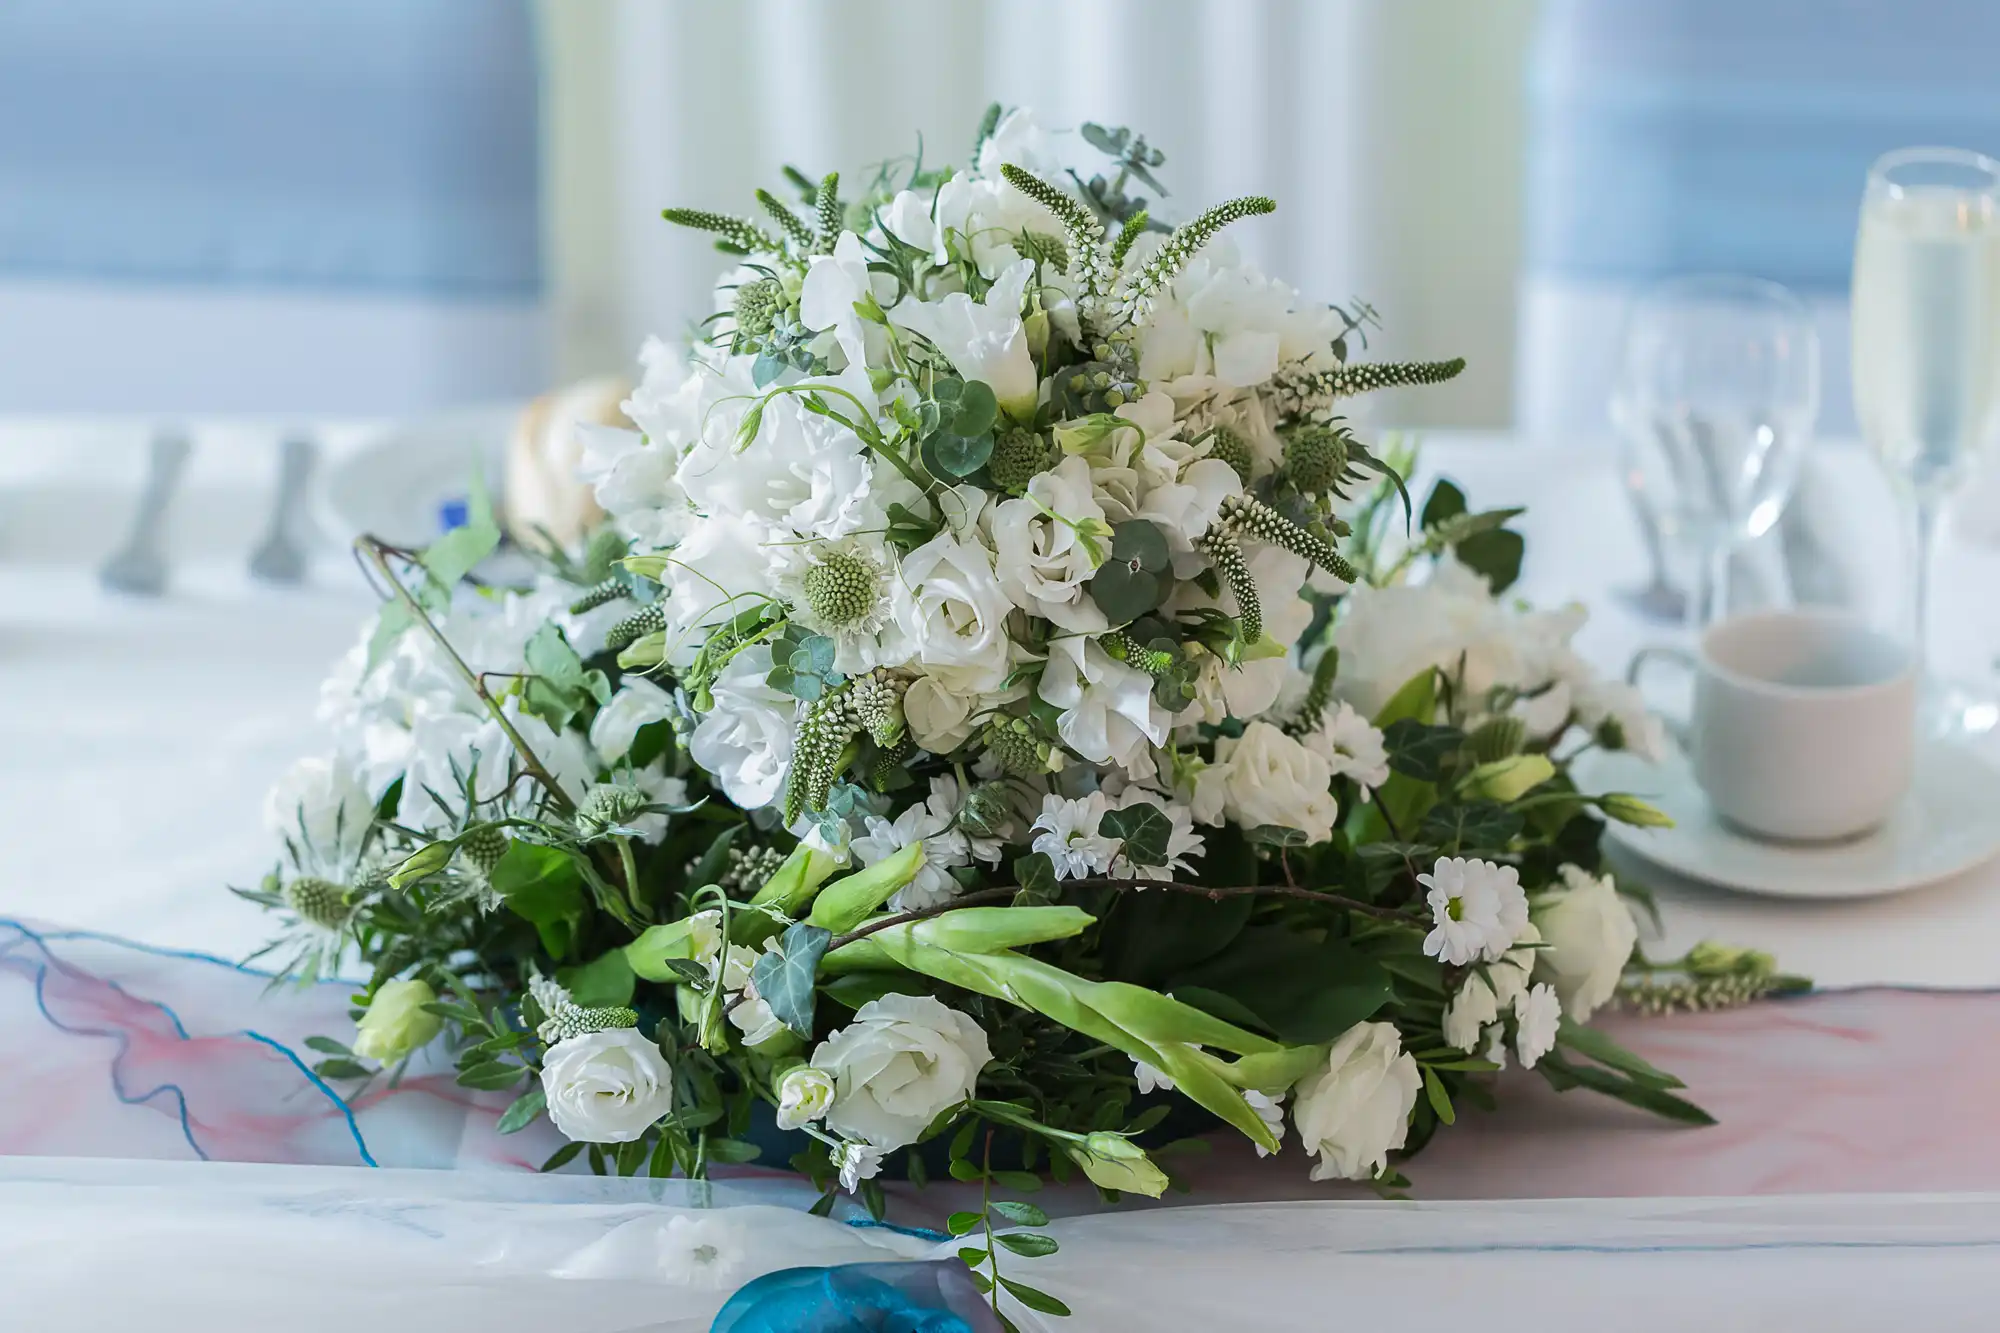 A lush bouquet of white flowers with green foliage on a table, next to a glass of champagne and a coffee cup.